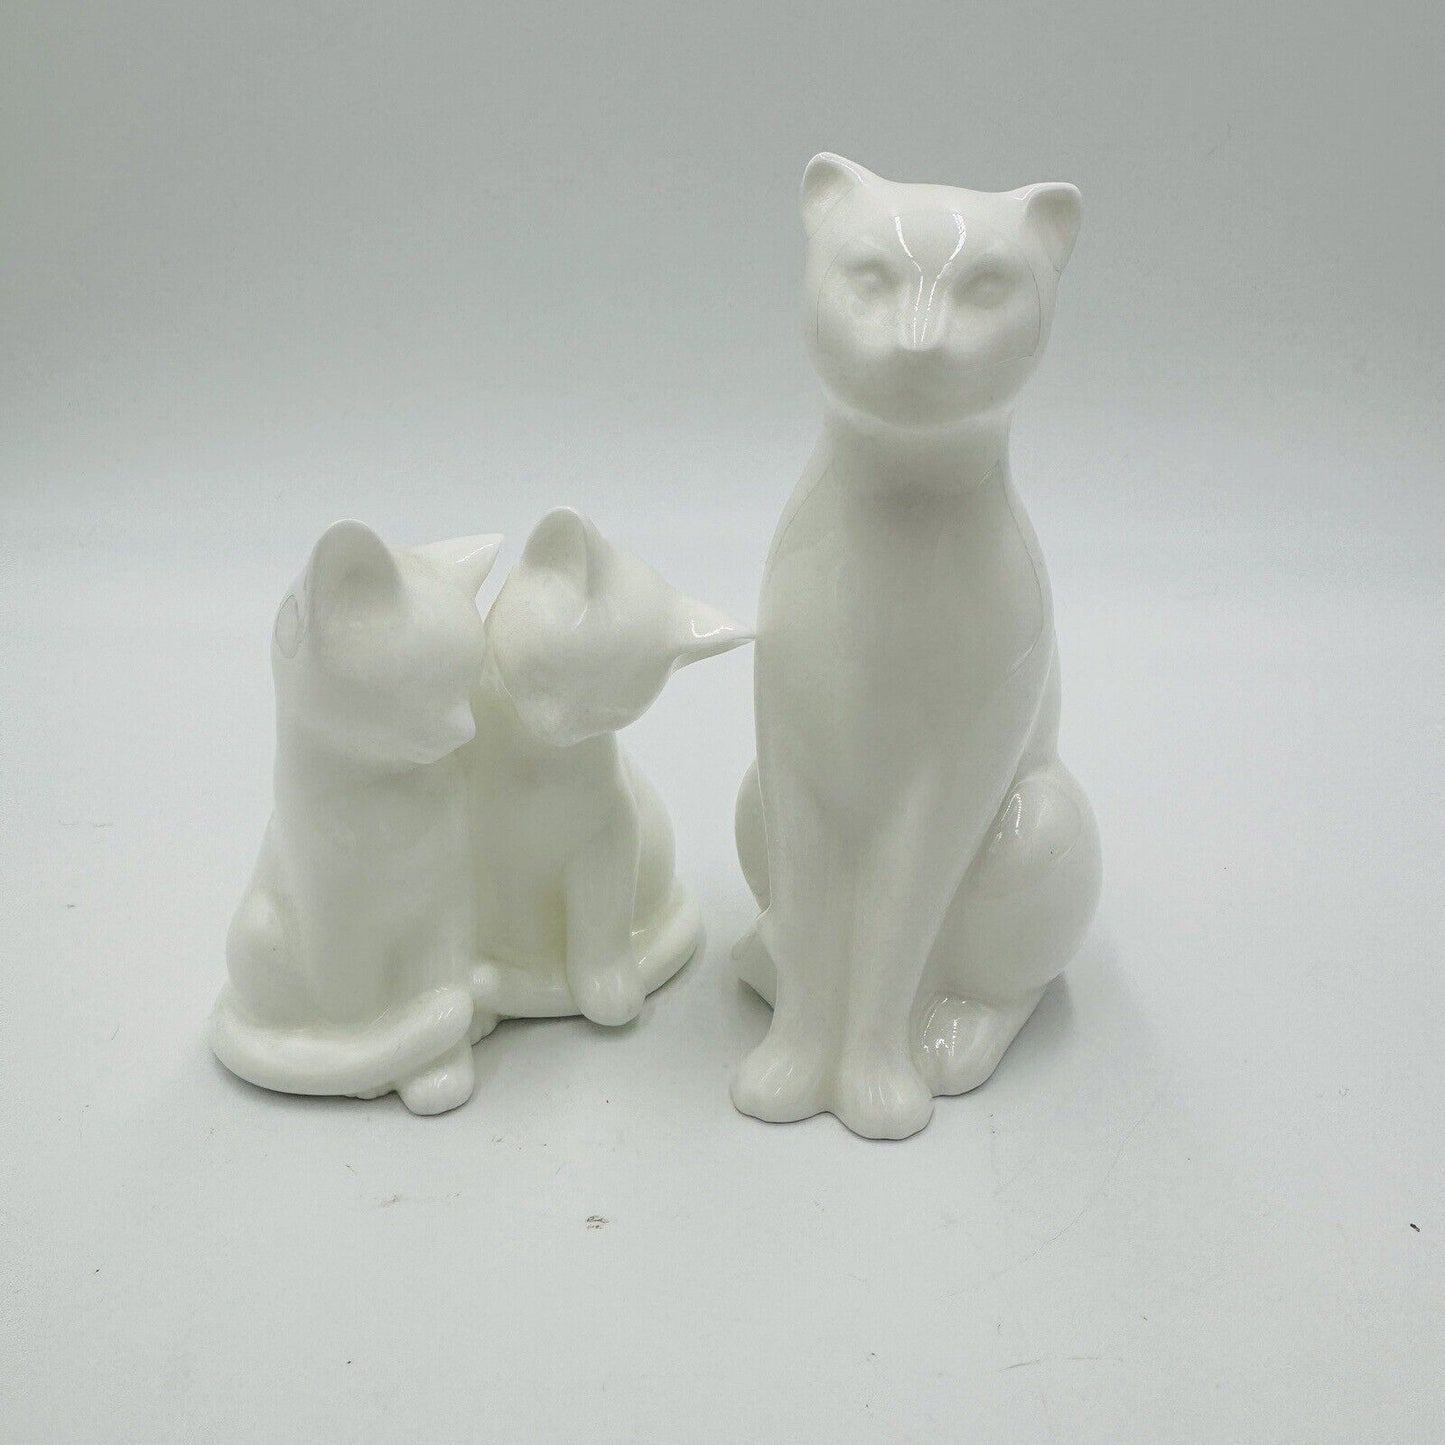 Vintage Coalport England White Glossy Bisque Moments Cat & Kitties Figurines